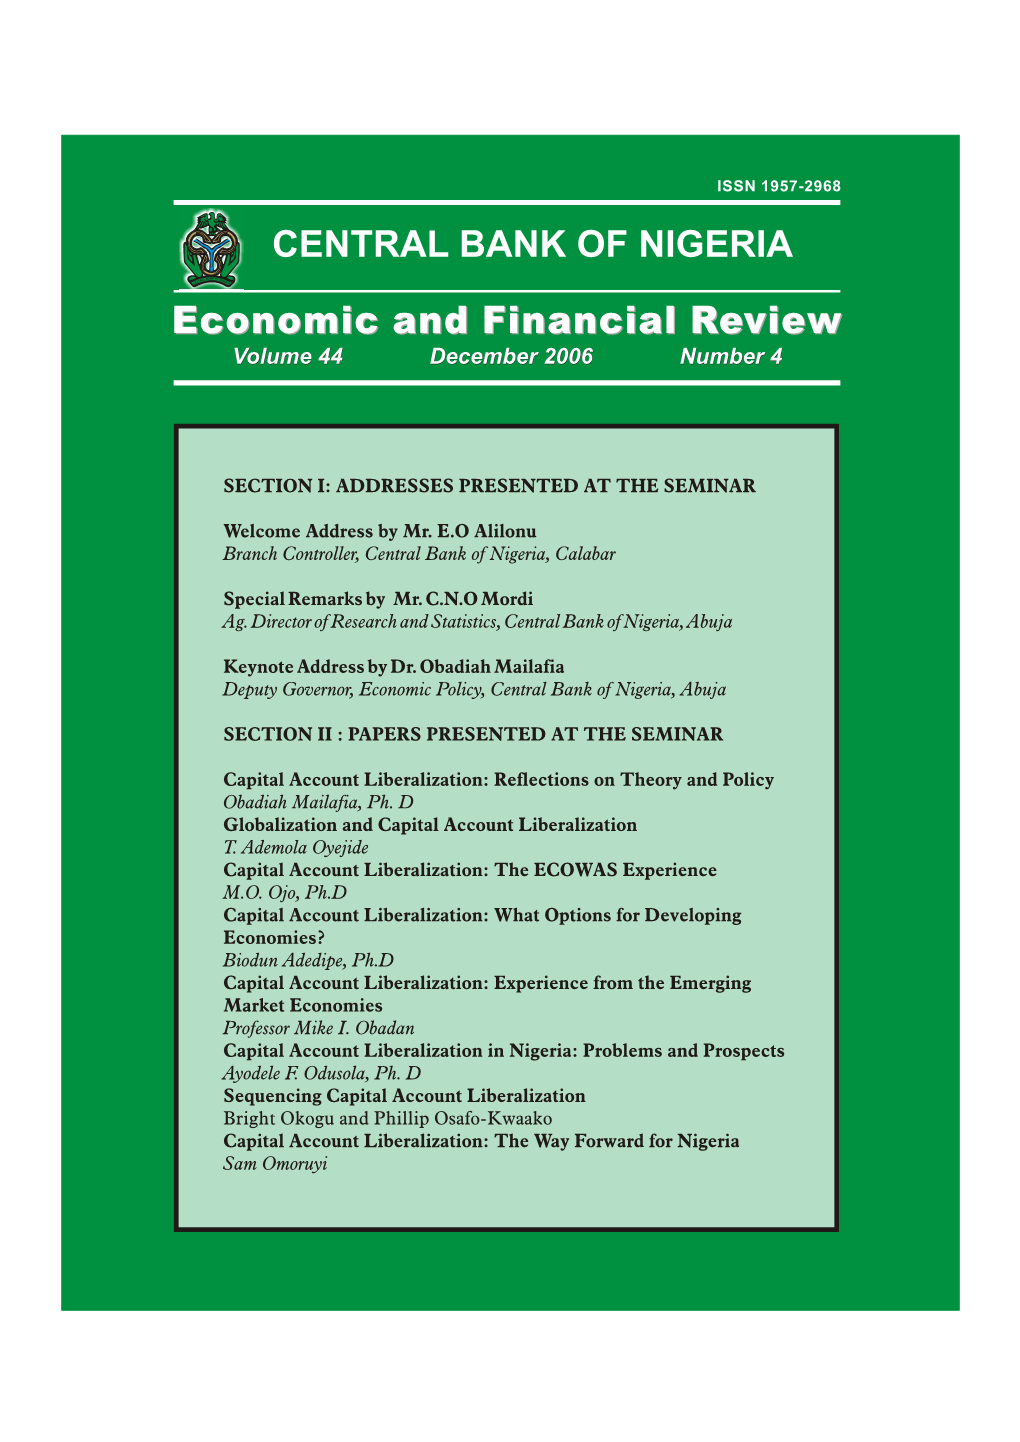 CBN Economic and Financial Review of December 2006